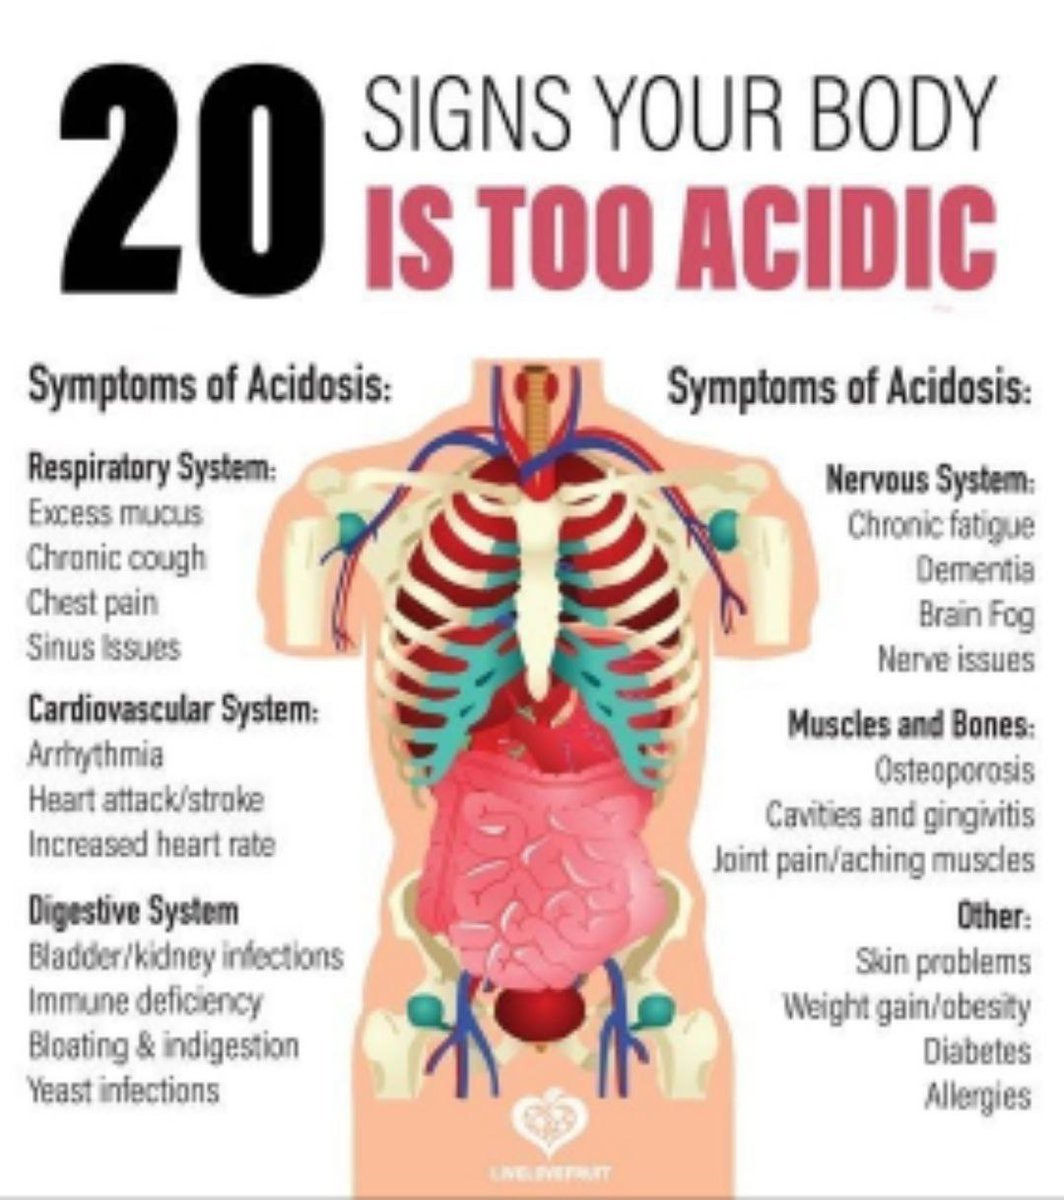 20 Signs that body is too acidic

Everything depends on digestion power - Mouth, Stomach, liver and pancreas to properly digest food. Without enough power even the superfood will become acidic in the body. Unfortunately this is grossly overlooked by mainstream science and